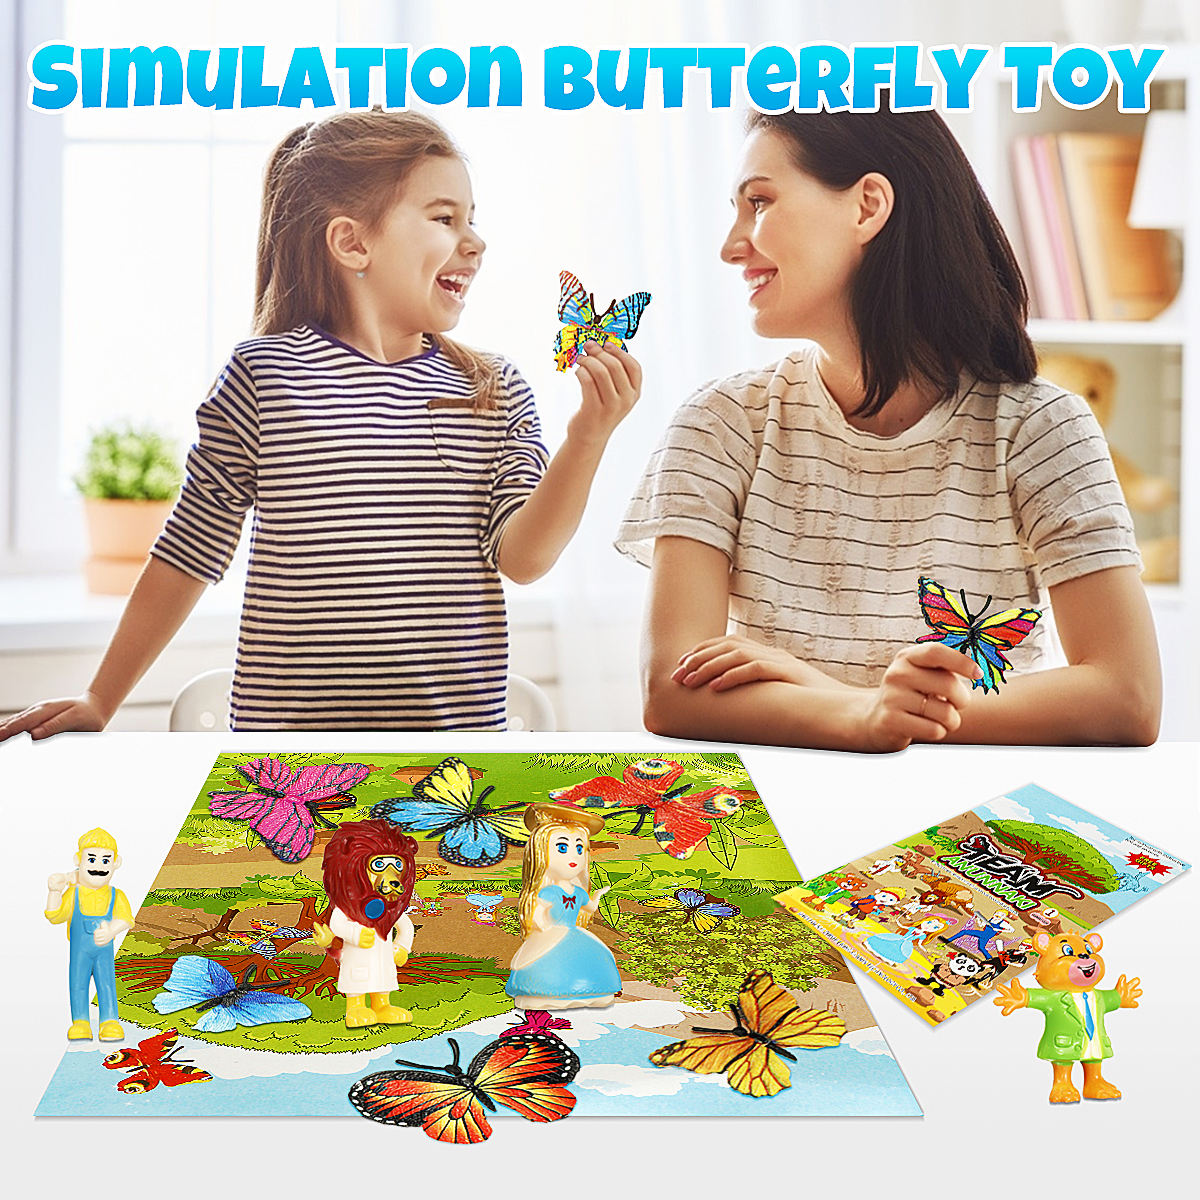 14-Pcs-High-Simulation-Colorful-Realistic-Insects-Butterfly-Animal-Figure-Doll-Model-Learning-Educat-1851298-2